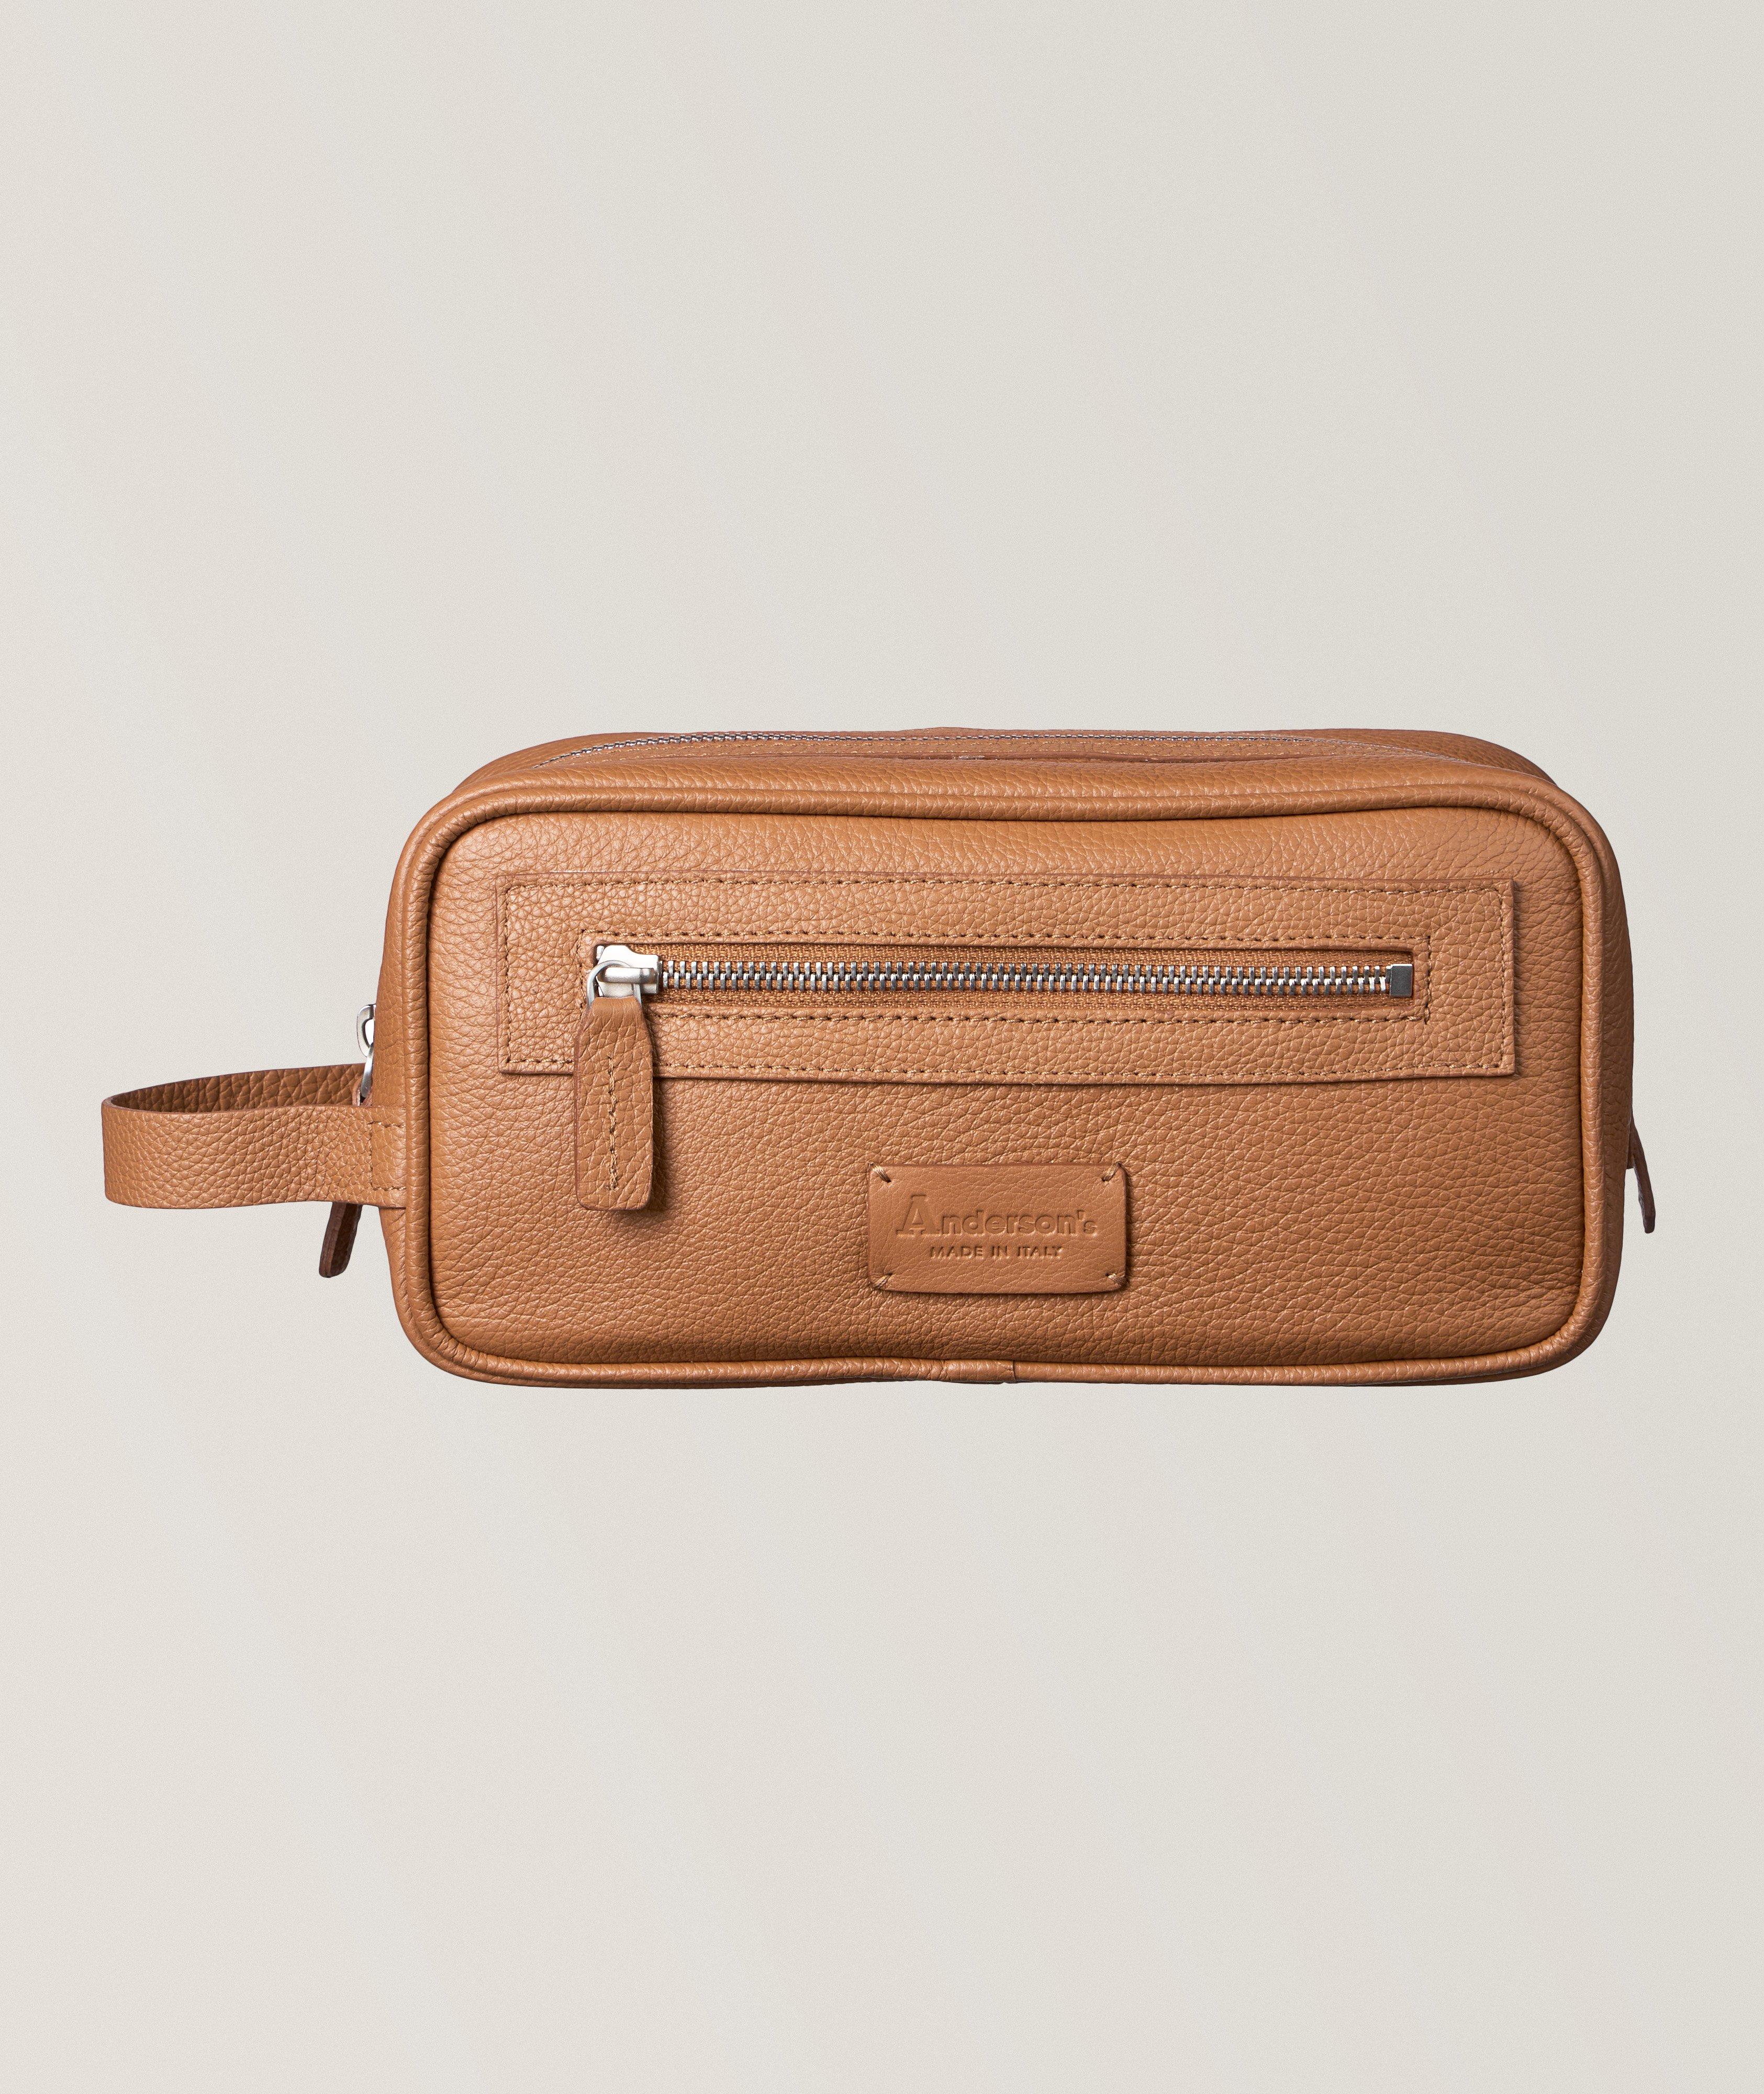 Grained Leather Toiletry Bag  image 0